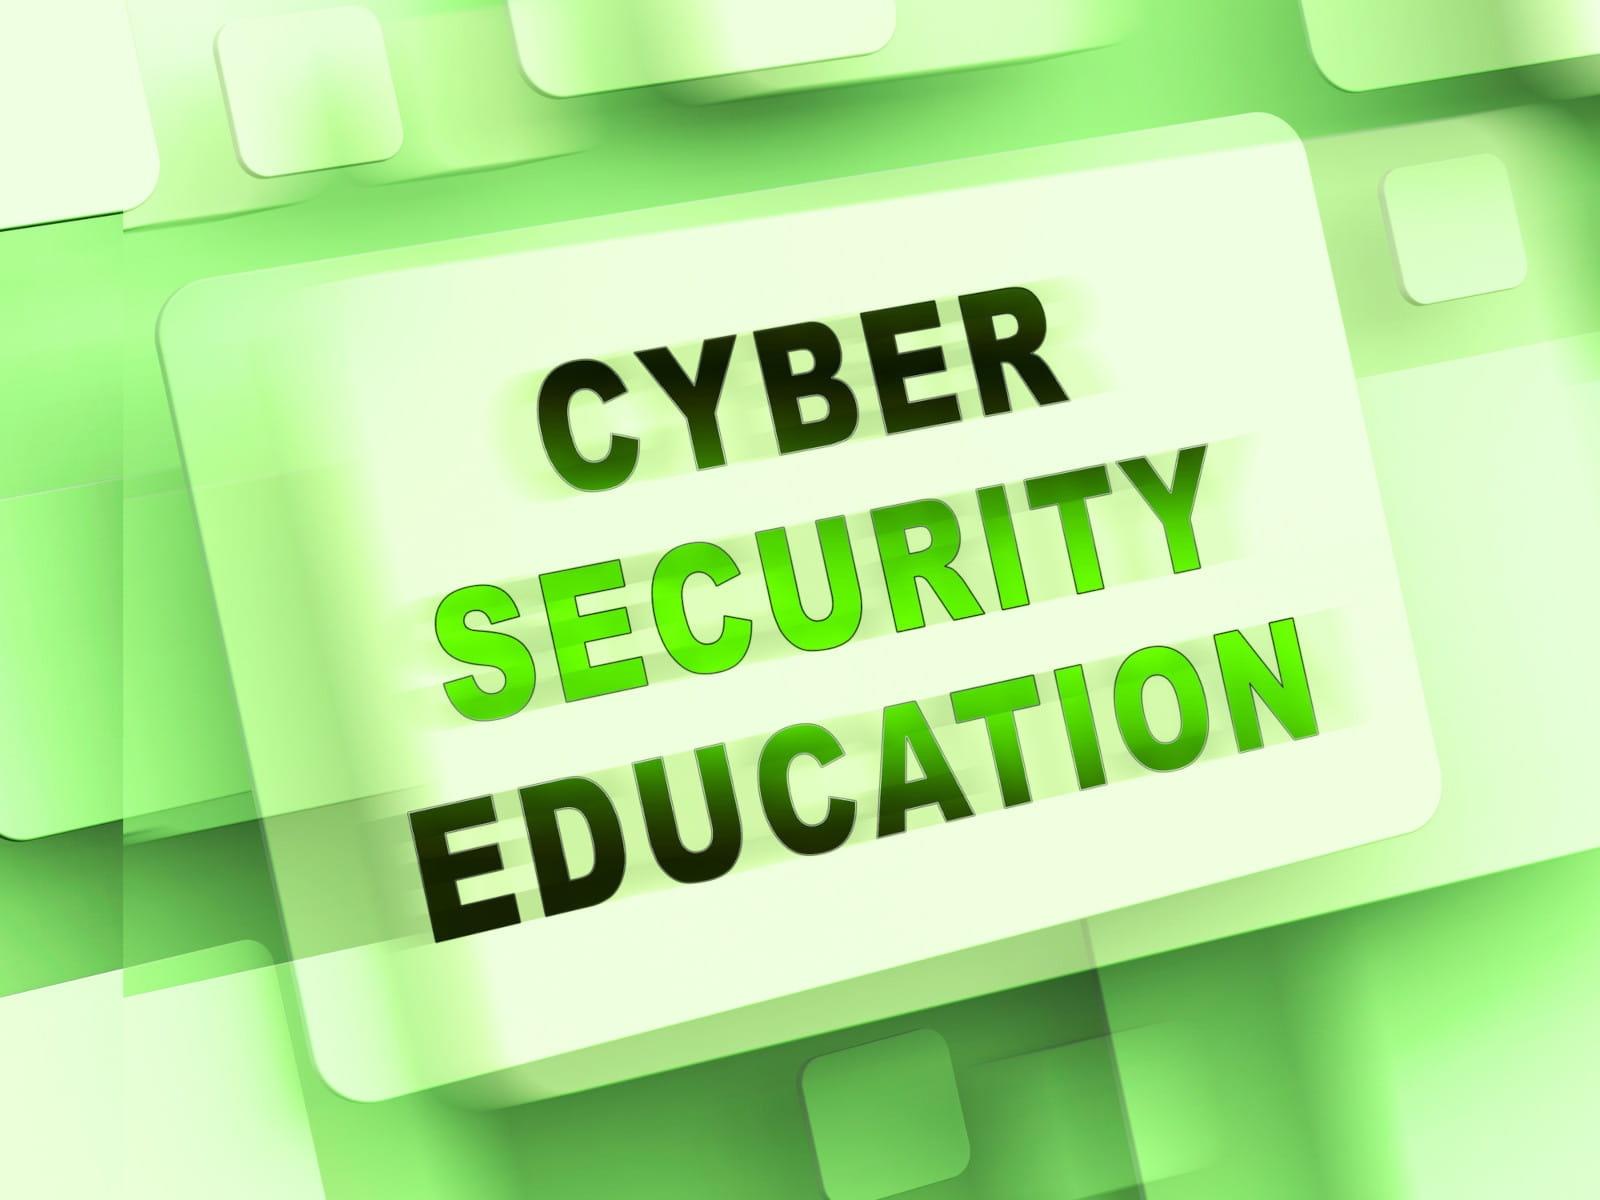 Training in RESILIA cyber resilience is incredibly important in today's cybersecurity climate. Here's what you need to know about training. - Advised Skills